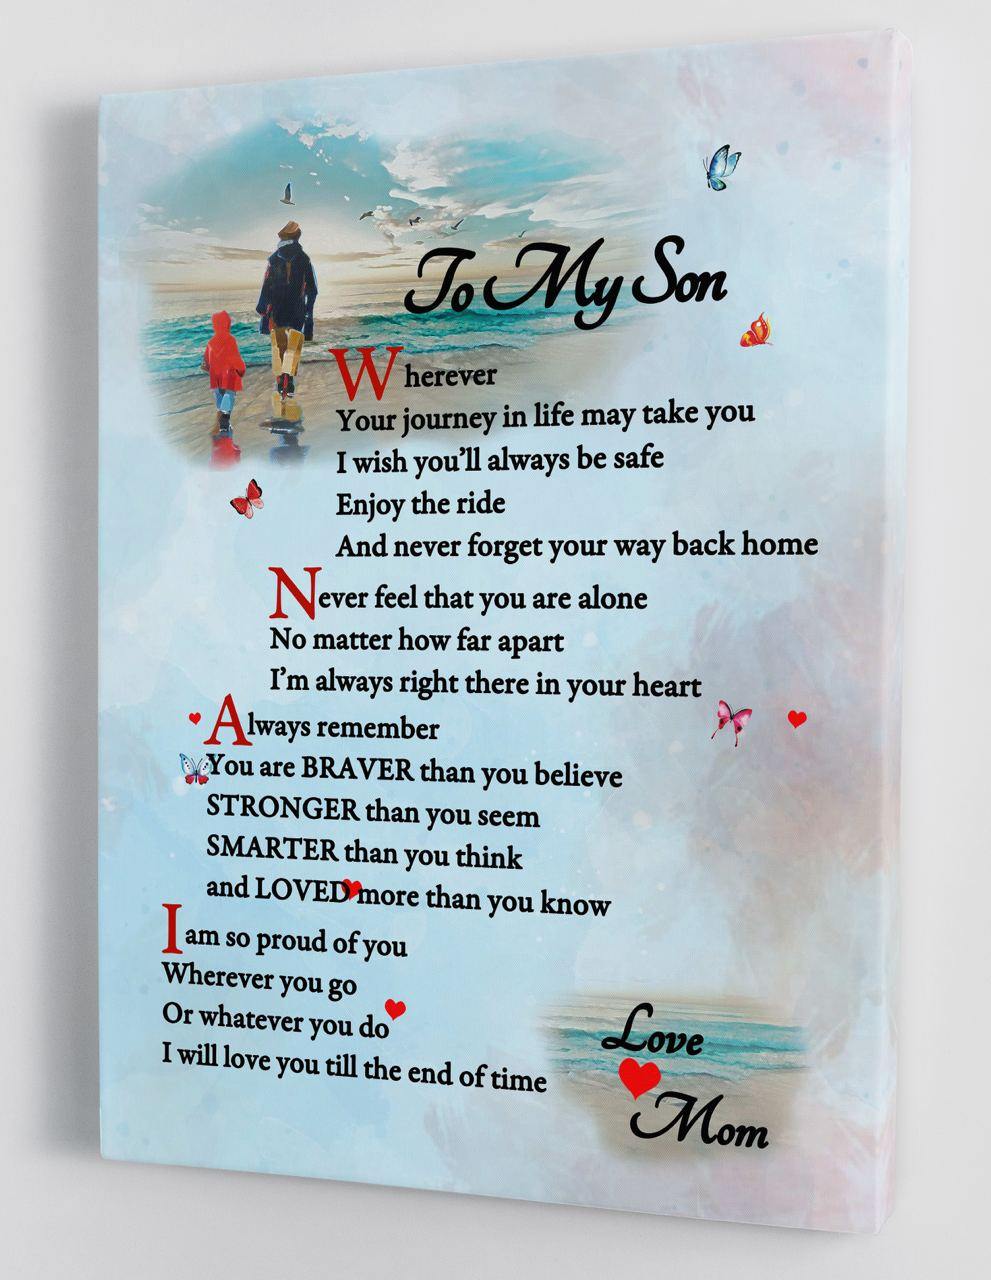 To My Son - From Mom - Framed Canvas Gift MS034 - DivesArt LLC